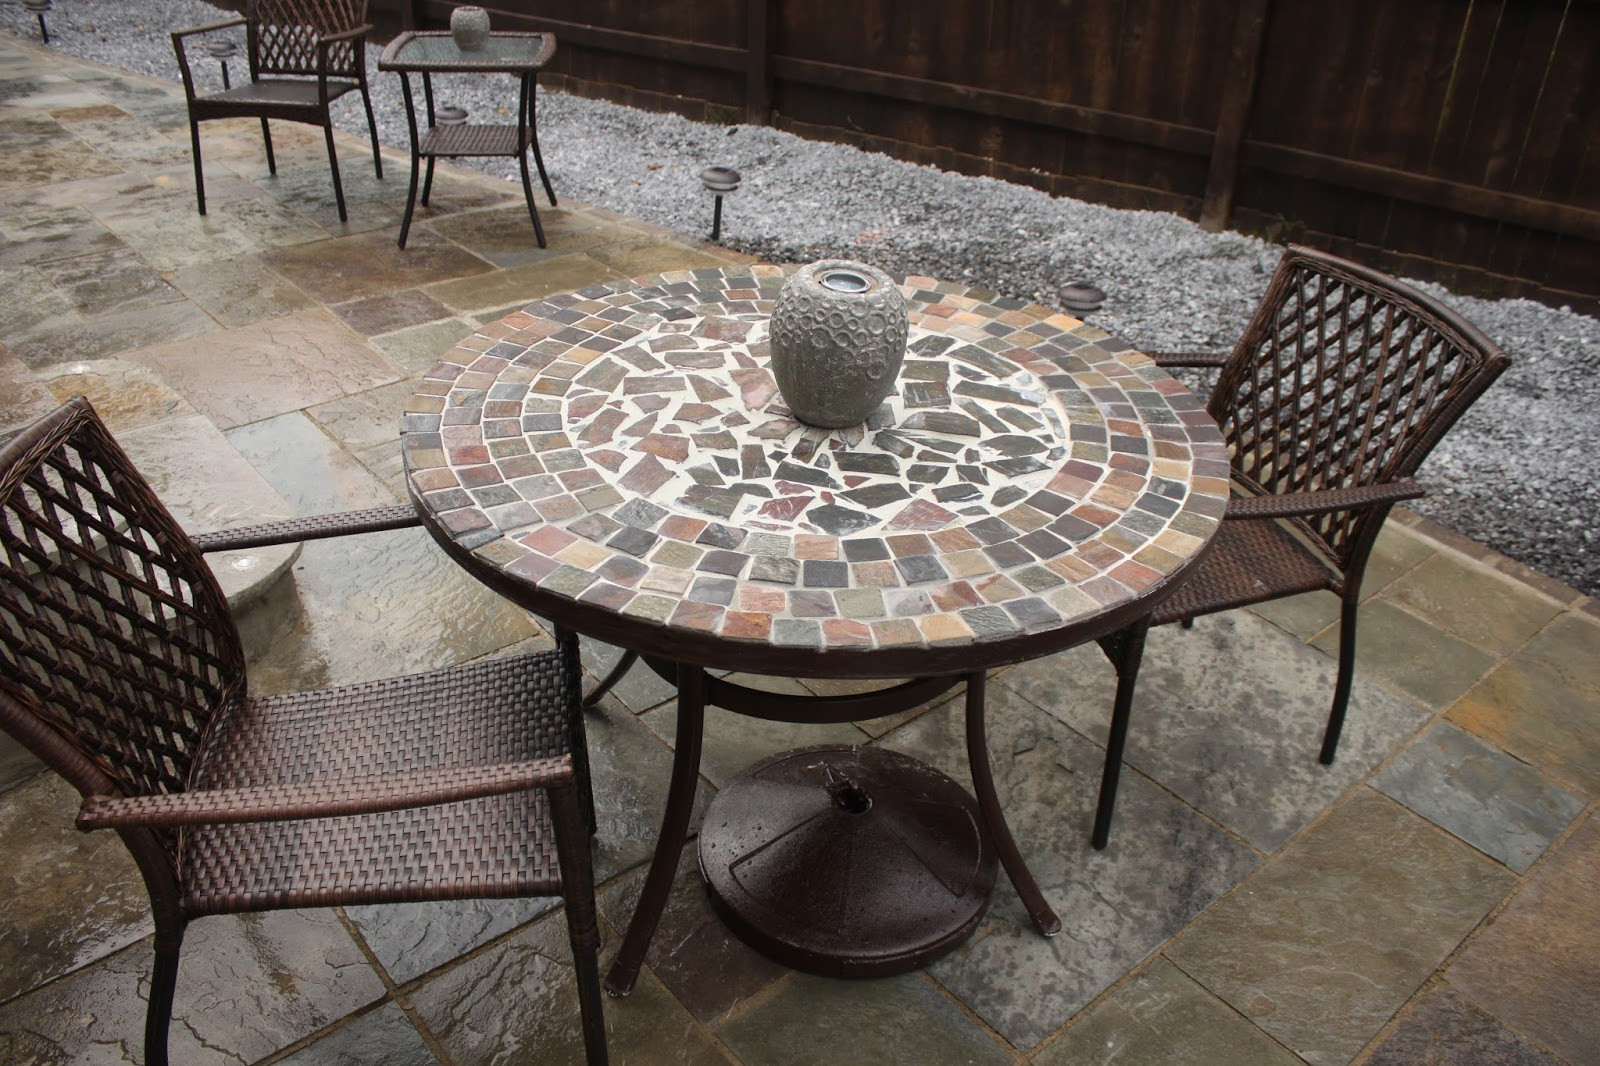 DIY Outdoor Tile Table
 DIY Stone Table Beaute39 J39adore Outdoor Tree Stump Table